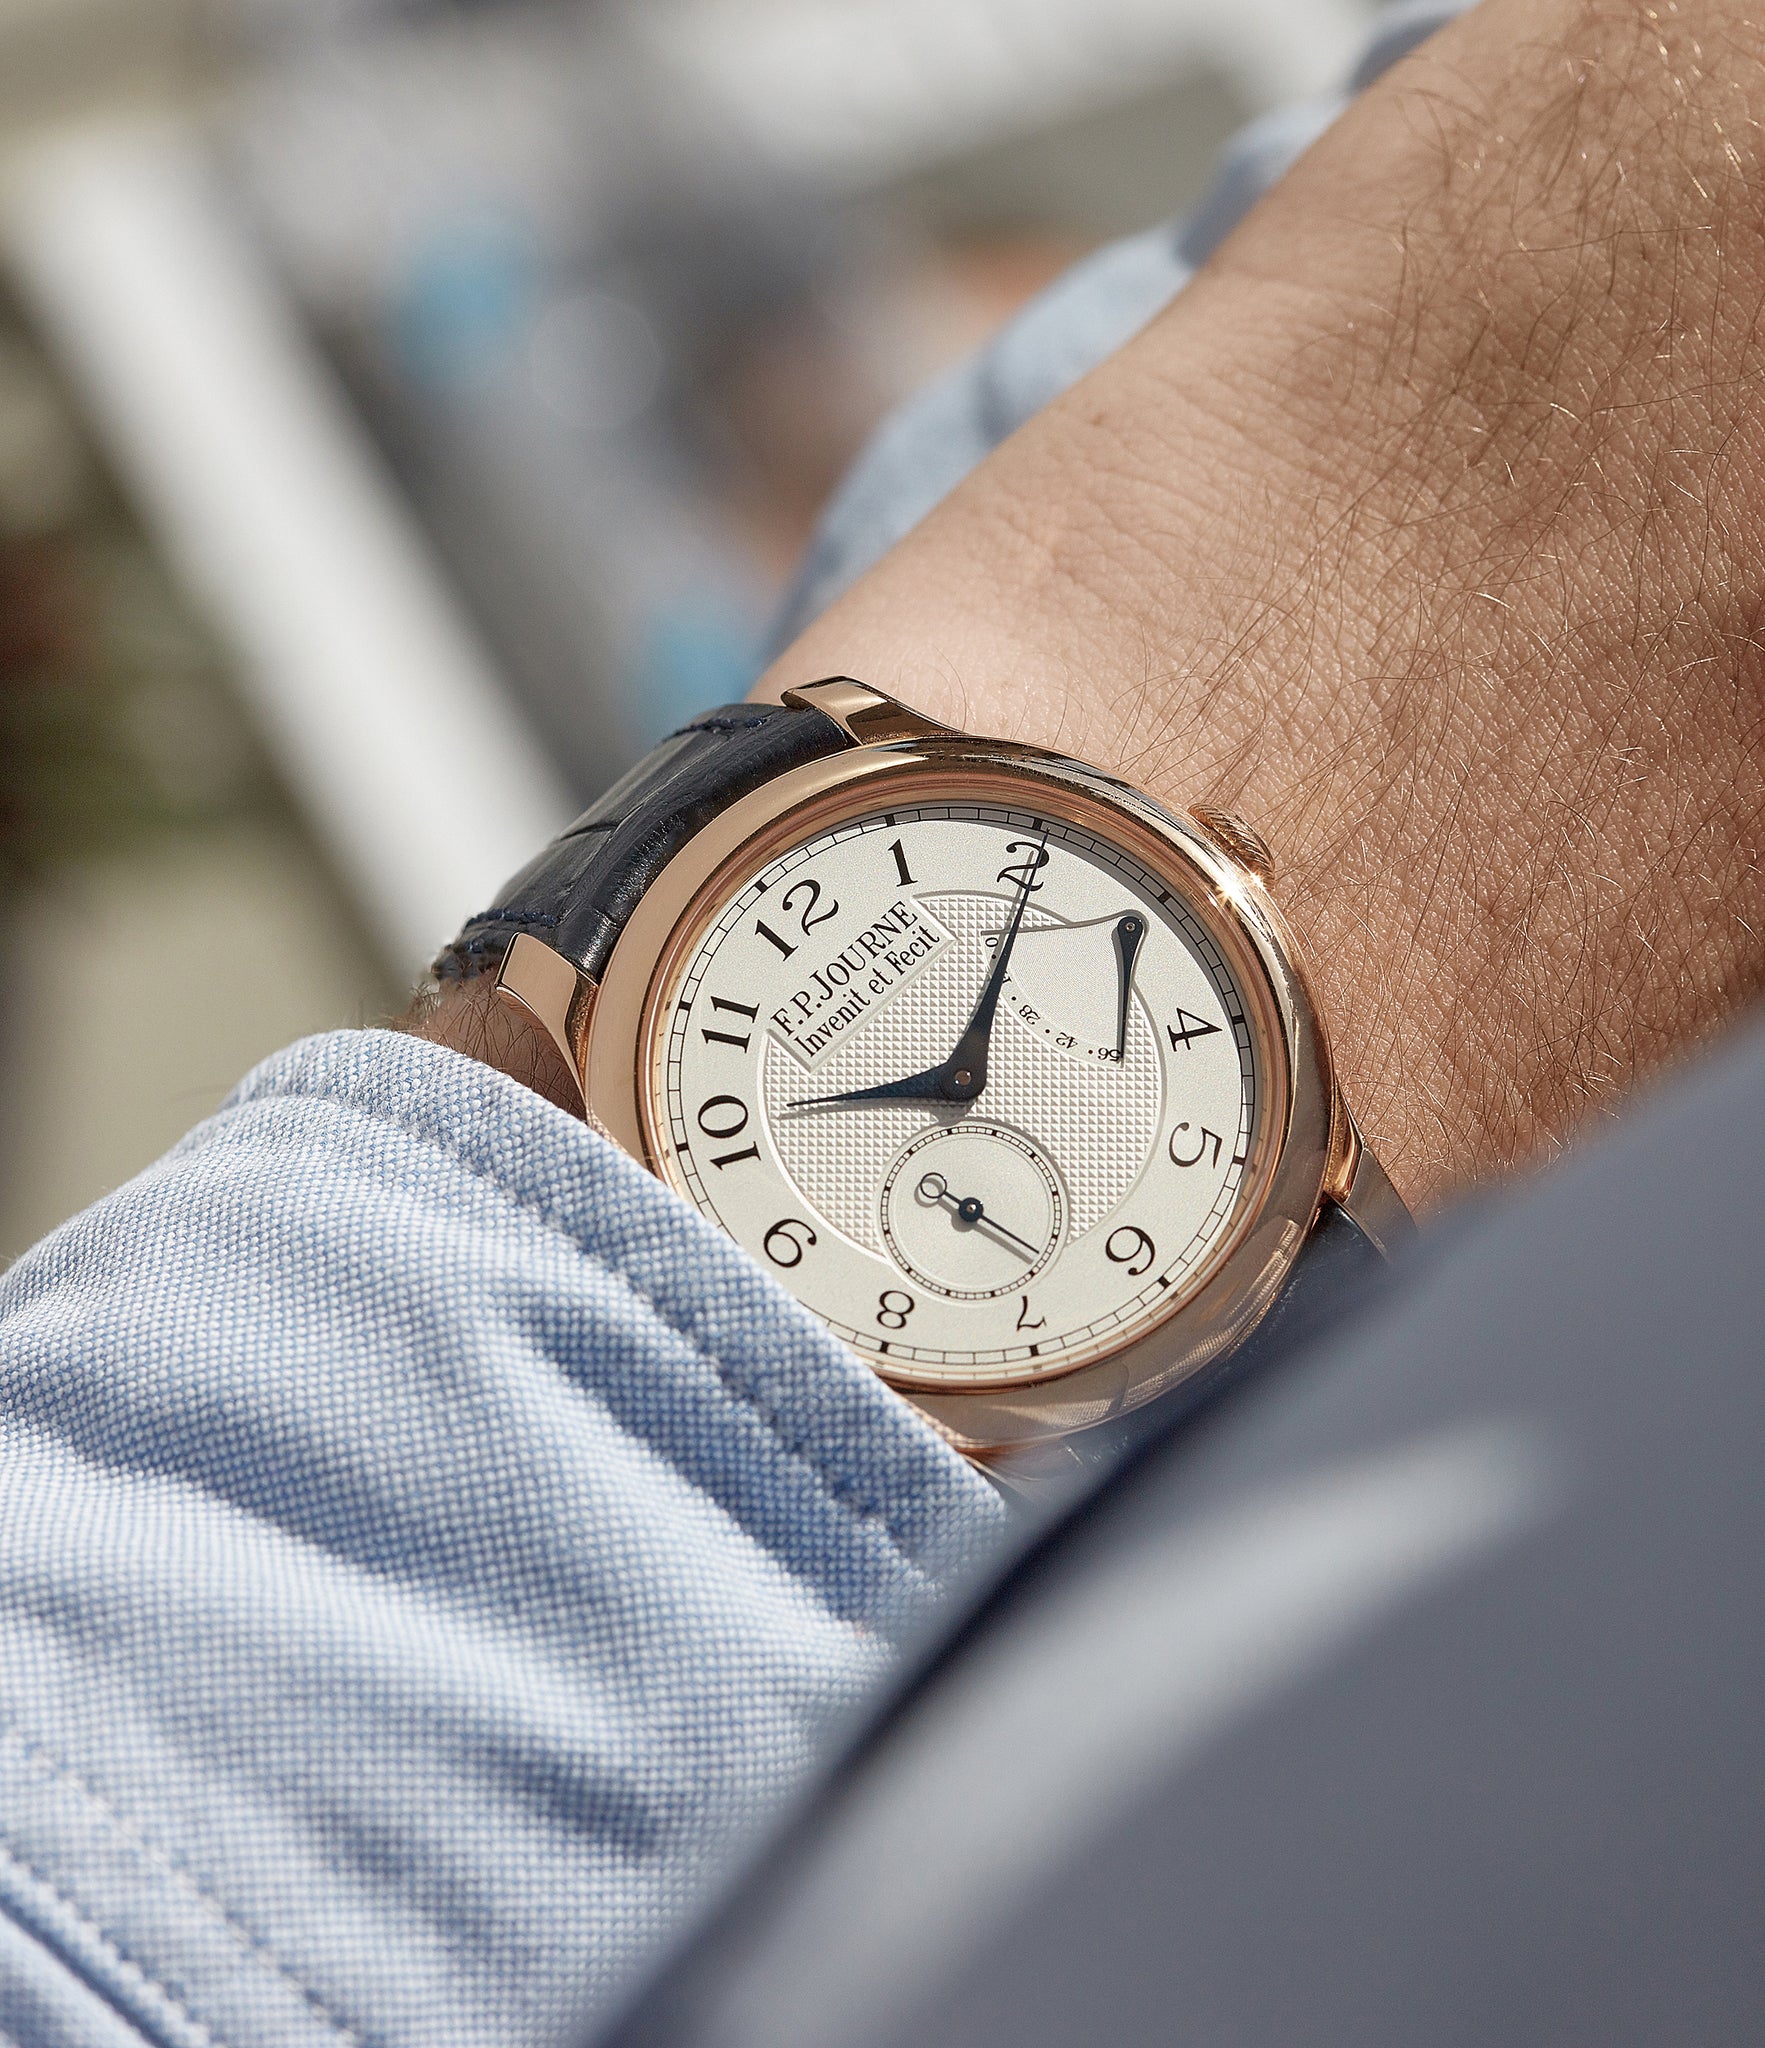 on the wrist F. P. Journe Chronometre Souverain silver dial rose gold dress watch for sale online at A Collected Man London UK specialist of independent watchmakers